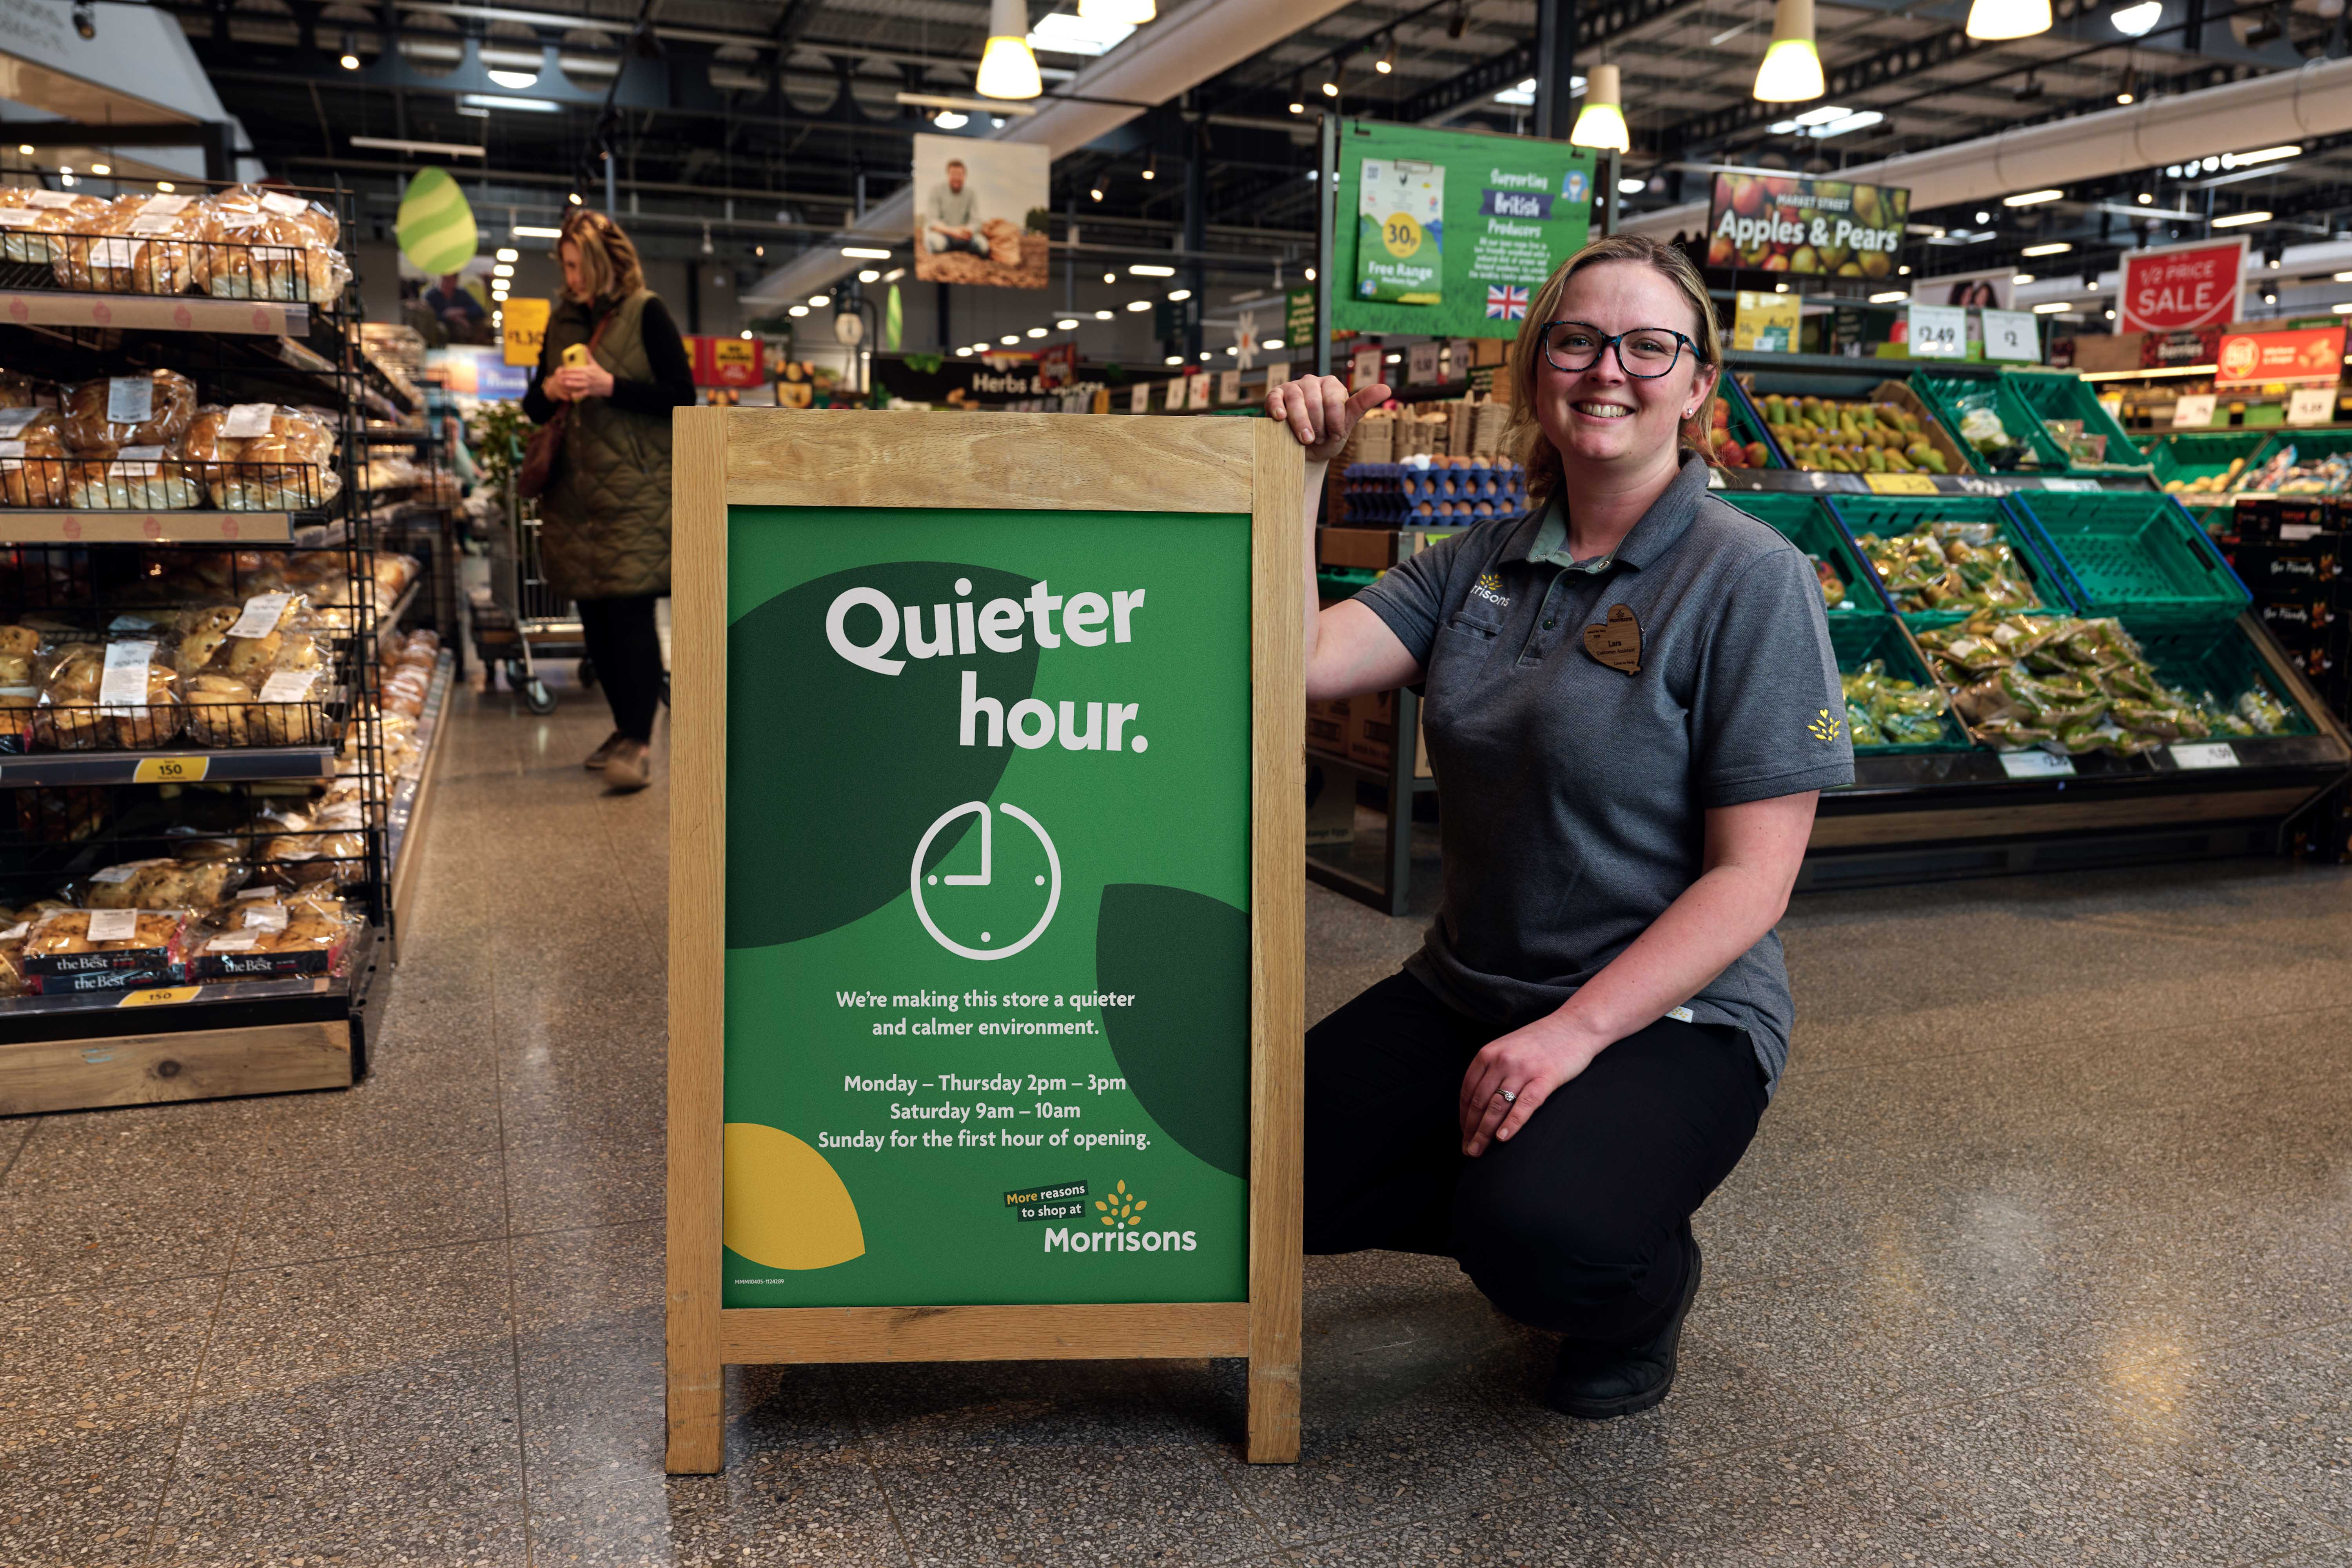 Morrisons introduces new afternoon quiet hour to help shoppers